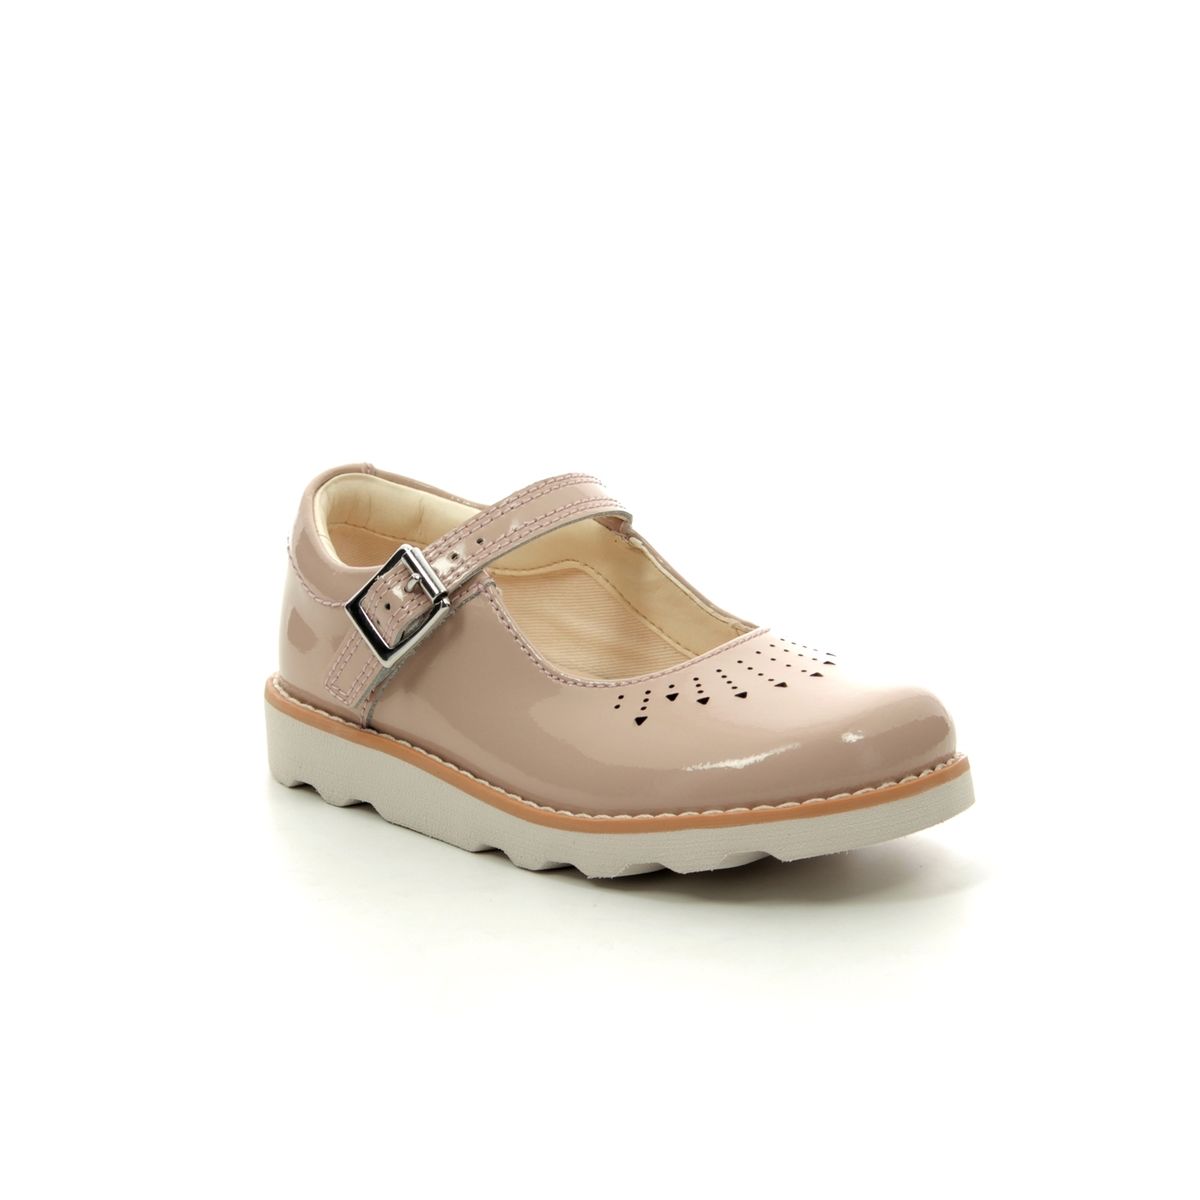 clarks nude shoes